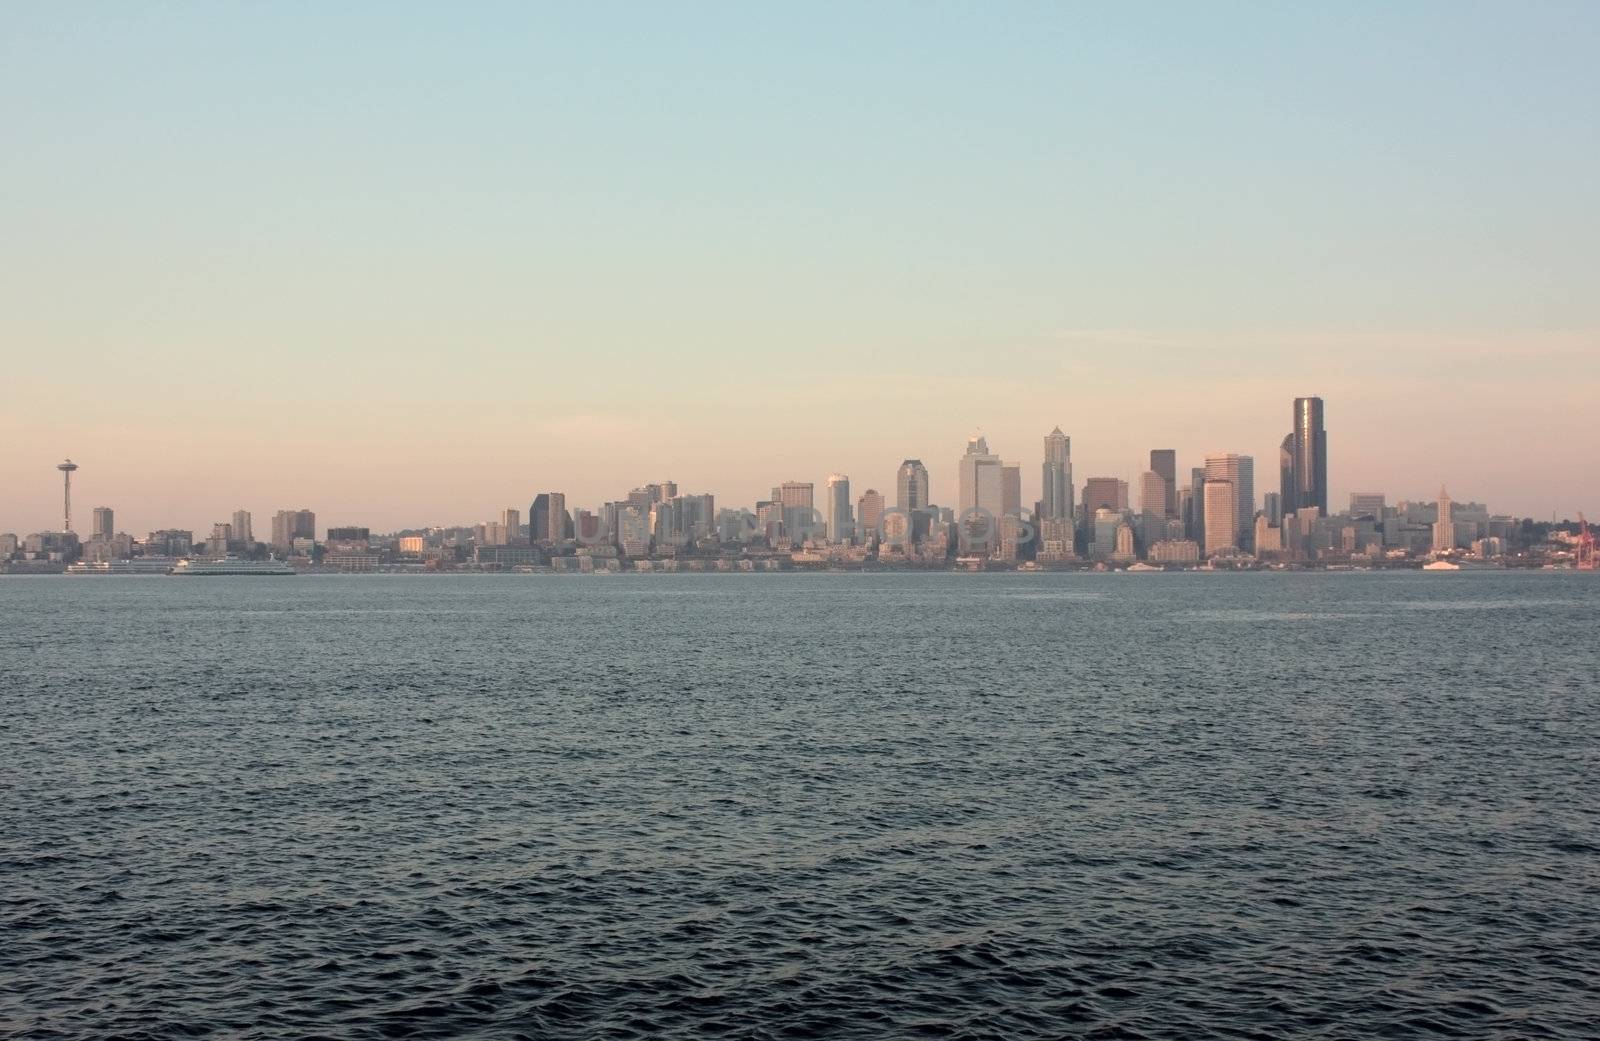 Downtown Seattle Skyline with Space Needle captured from a vantage point across the waters of the Puget Sound.